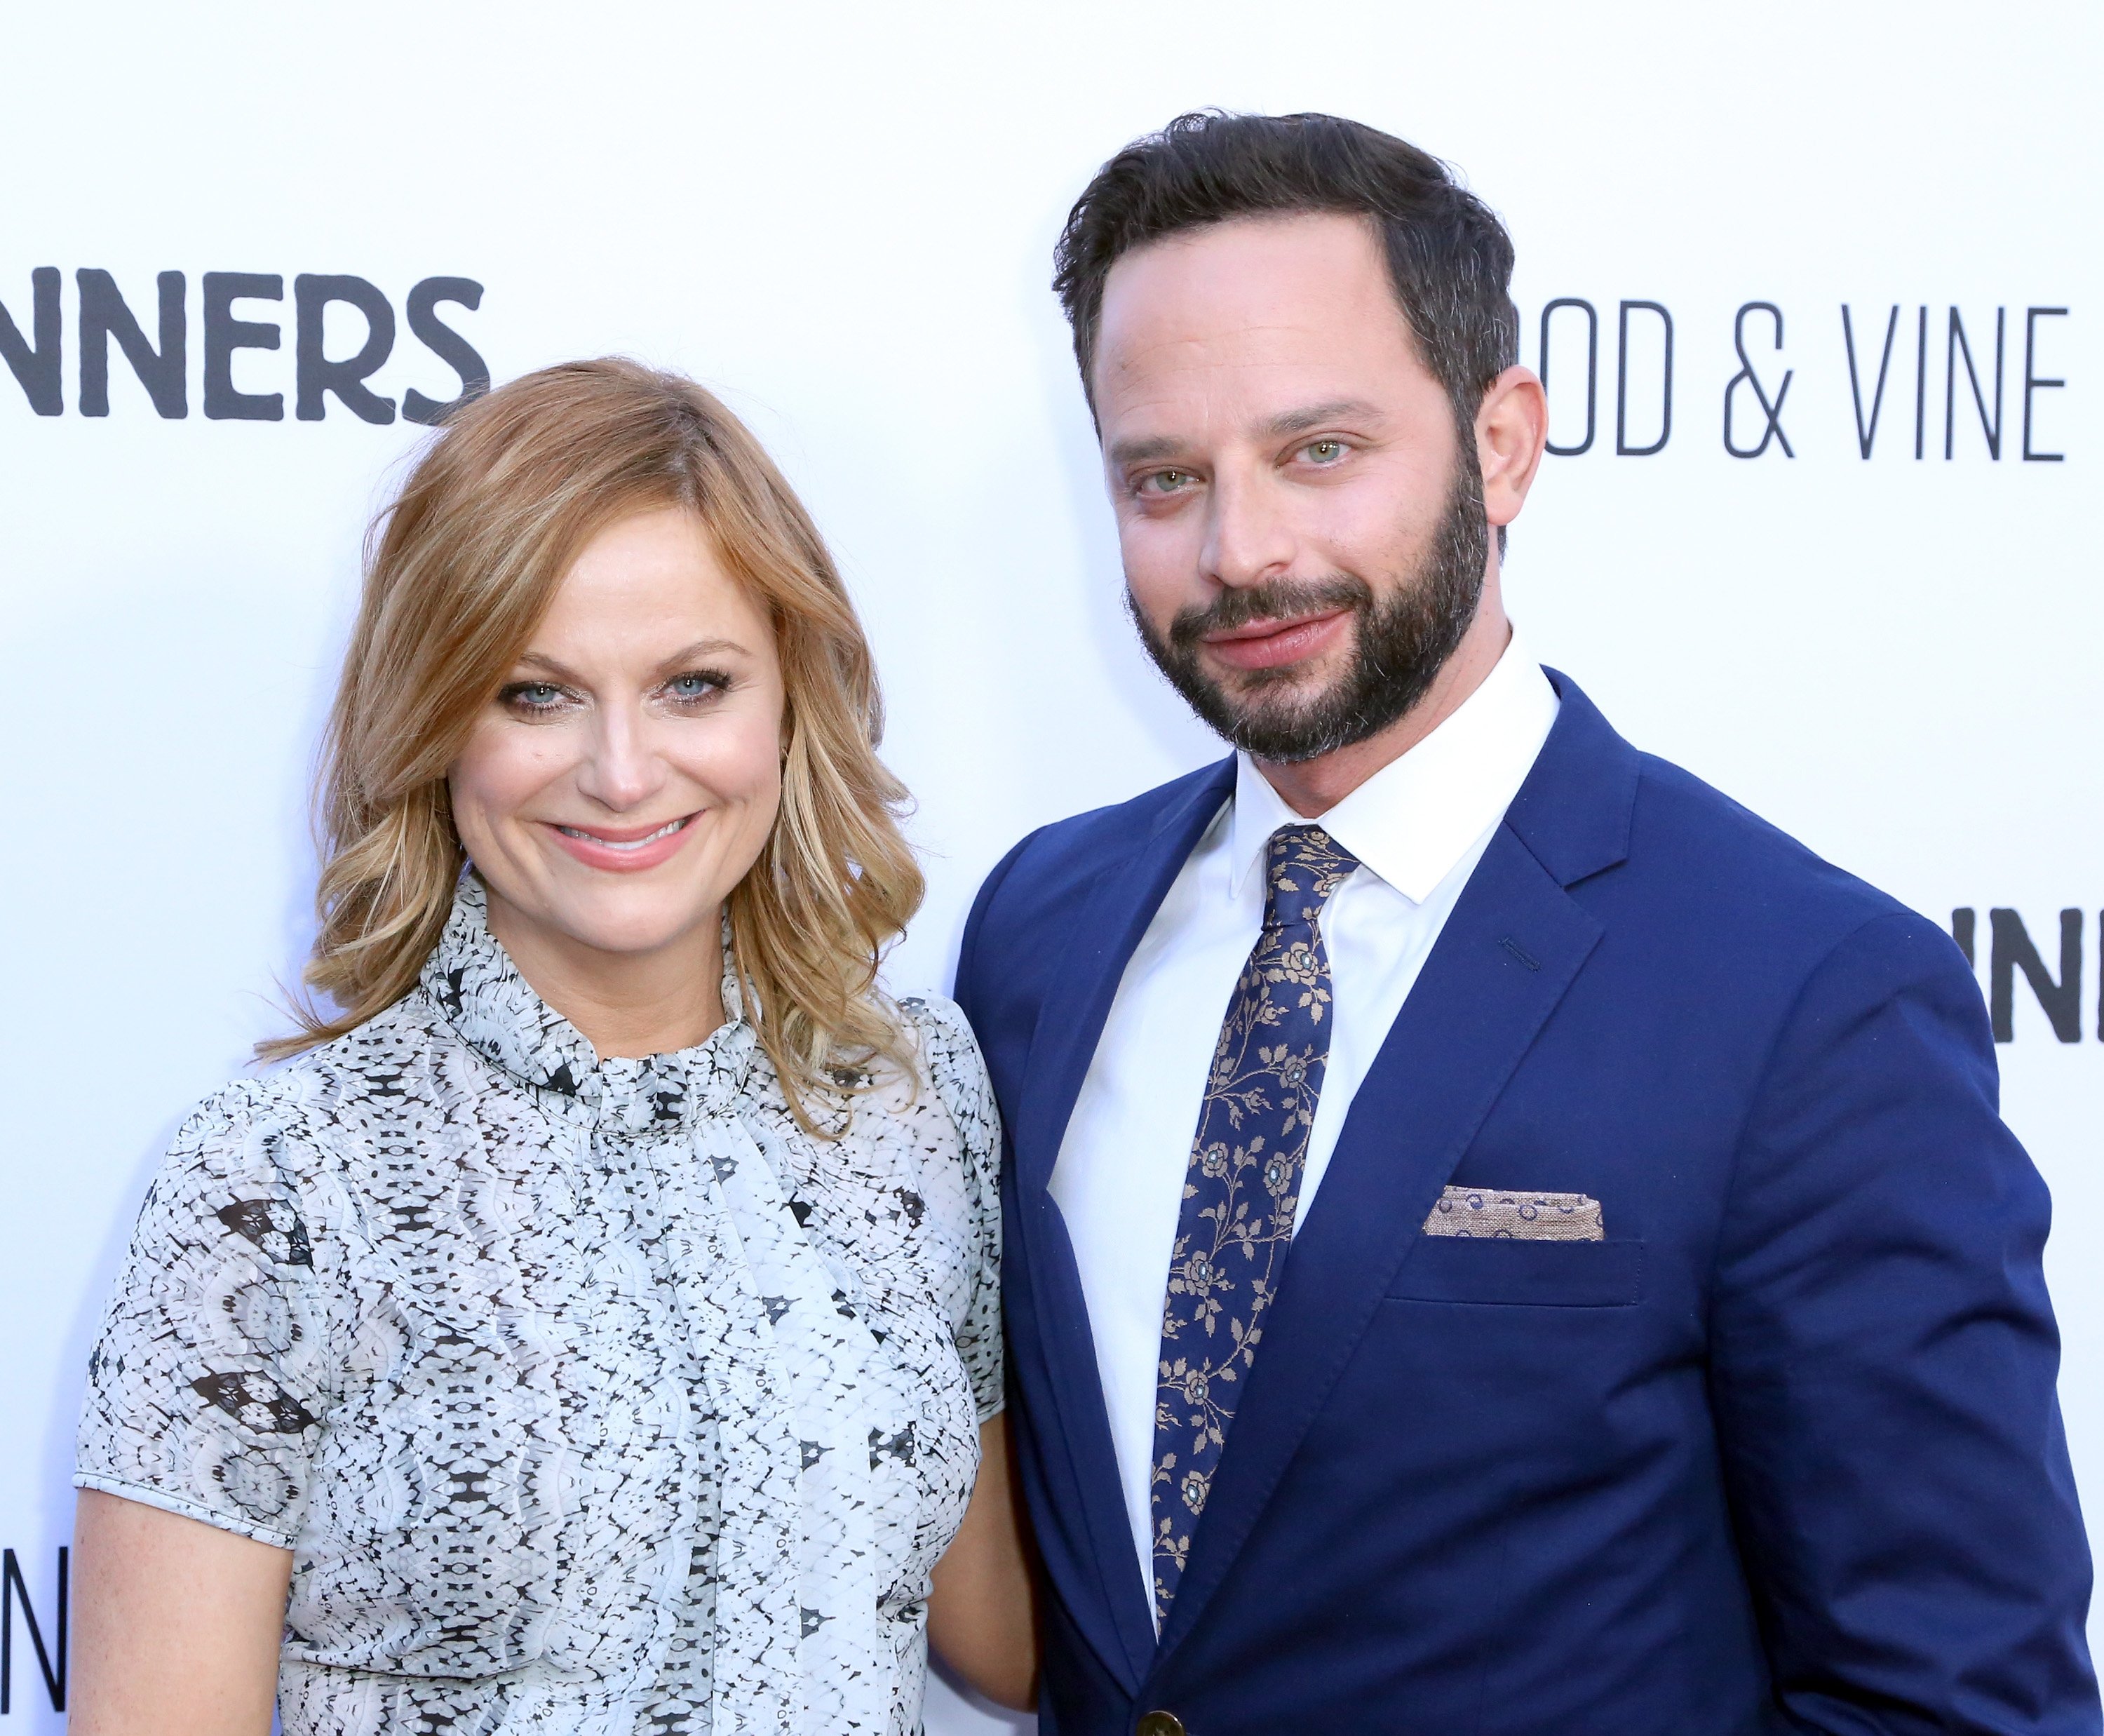 Amy Poehler and Nick Kroll attend the "Adult Beginners" film premiere at ArcLight Hollywood on April 15, 2015, in Hollywood, California. | Source: Getty Images